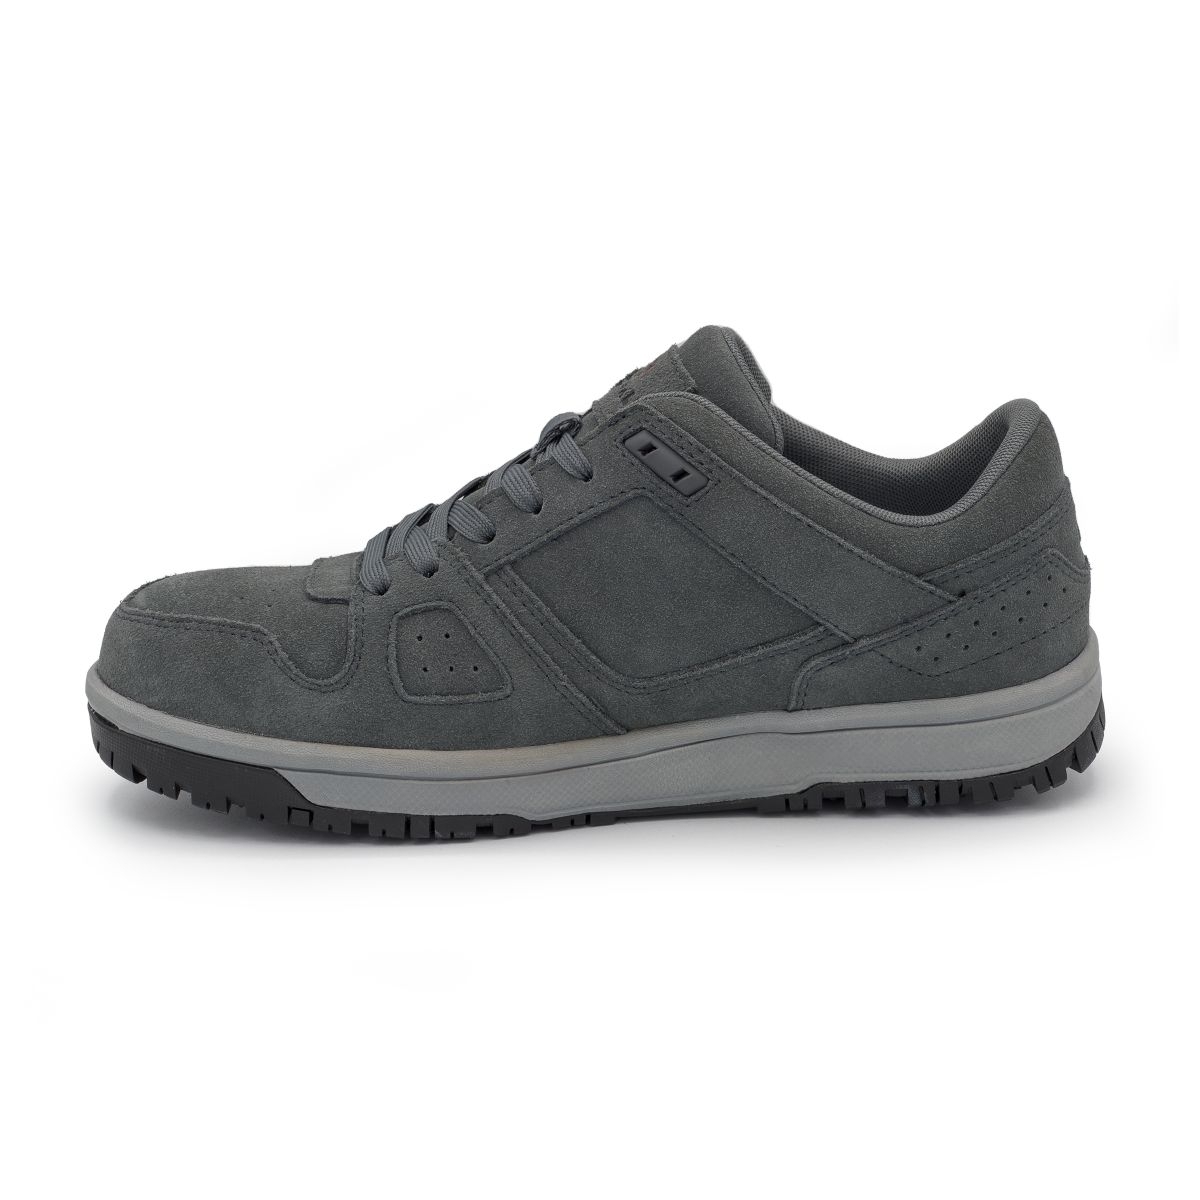 AIRWALK SAFETY Men's Mongo Composite Toe EH Work Shoe Charcoal/Grey - AW6301 CHARCOAL/GRAY - CHARCOAL/GRAY, 9-M